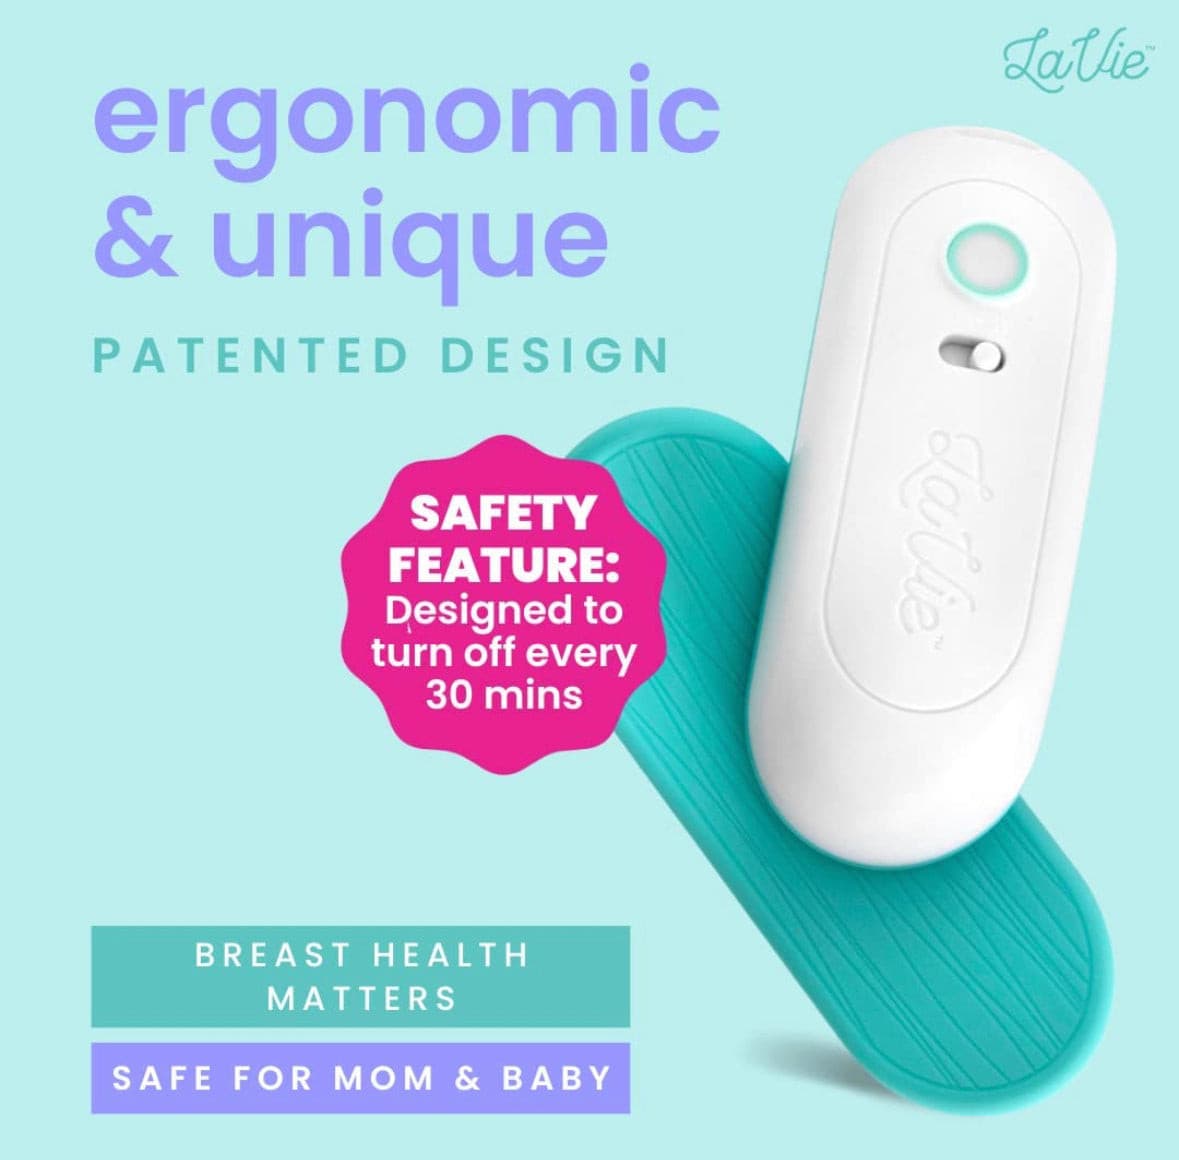 LaVie 3-in-1 Warming Lactation Massager, 2 Pack.